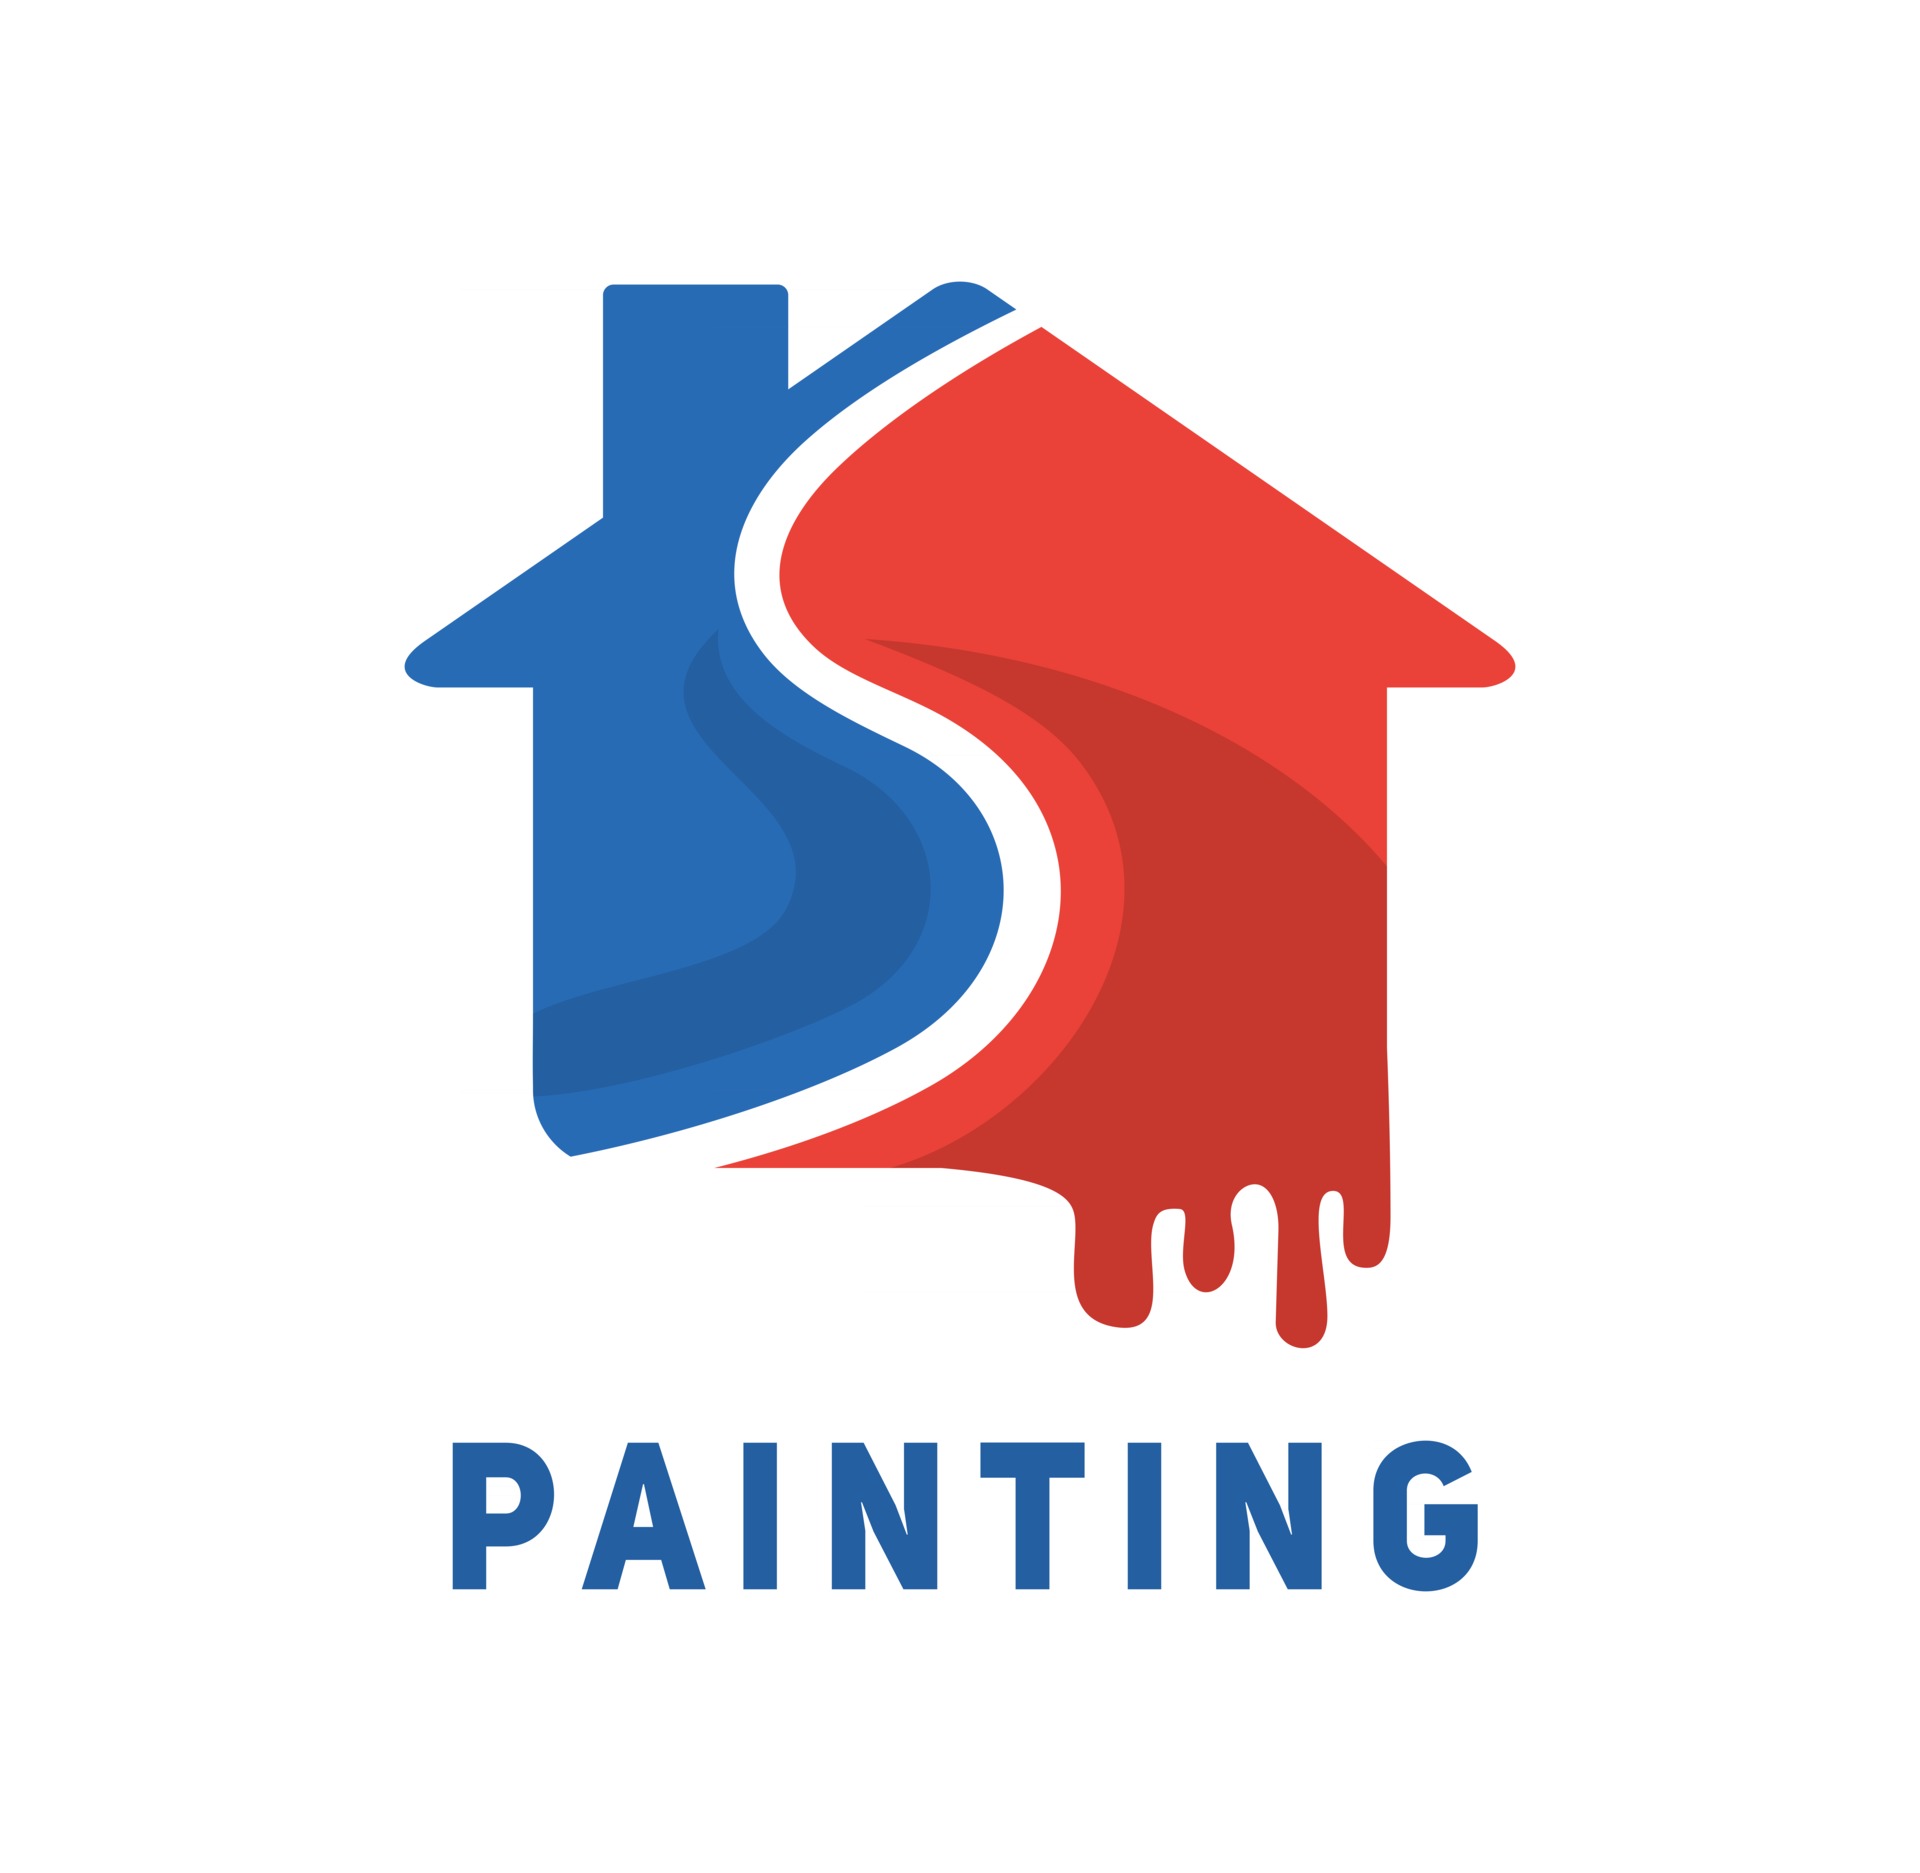 Painting company logo design illustration vector eps format , suitable ...